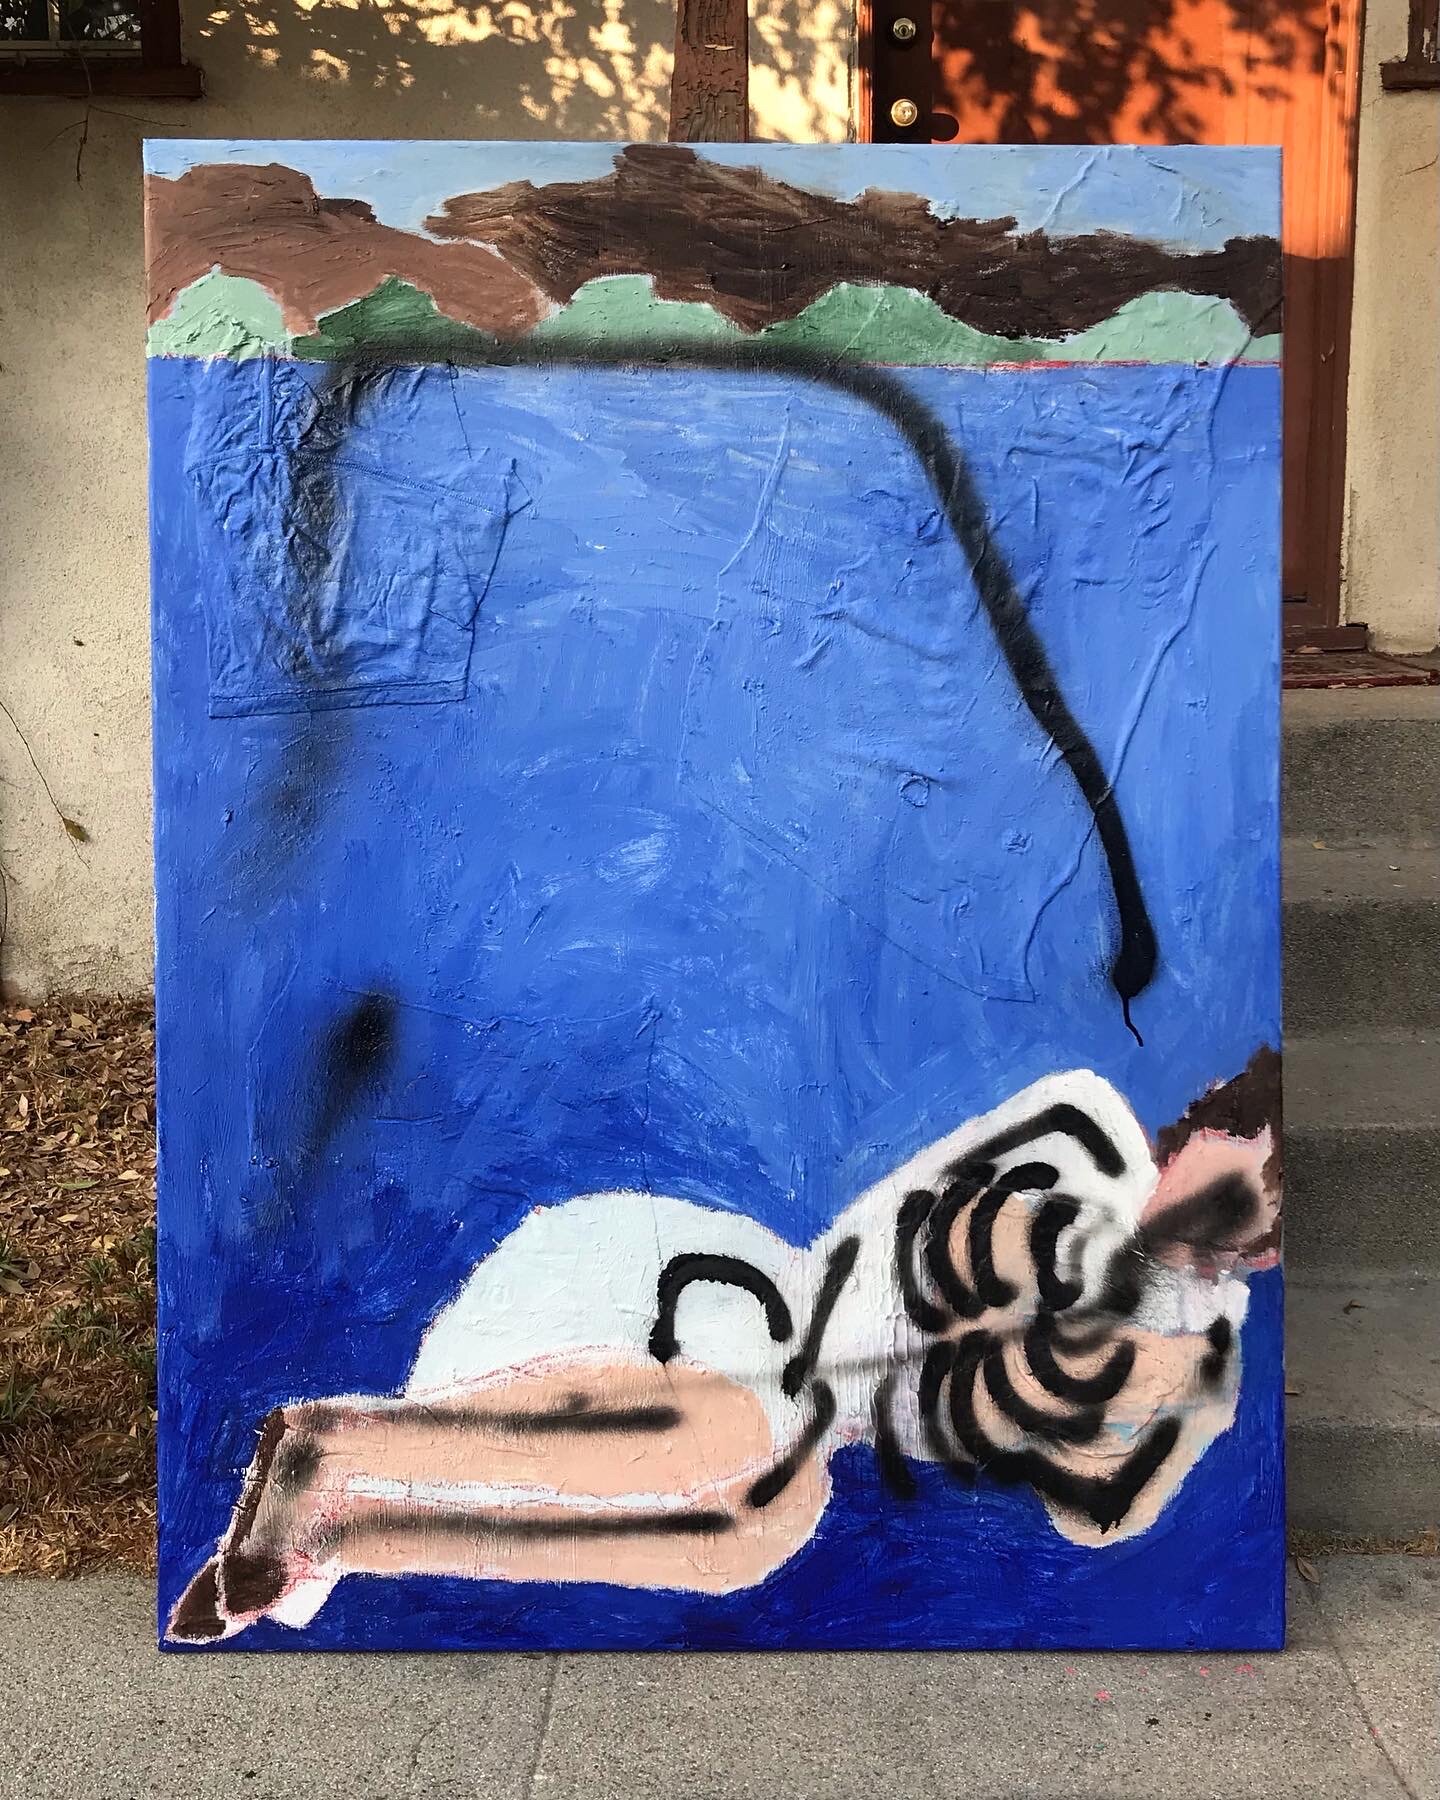 Sleeping, Dreaming, Fishing, 2020, acrylic, spray paint, oil, collaged fabric on canvas, 36 x 48 in.